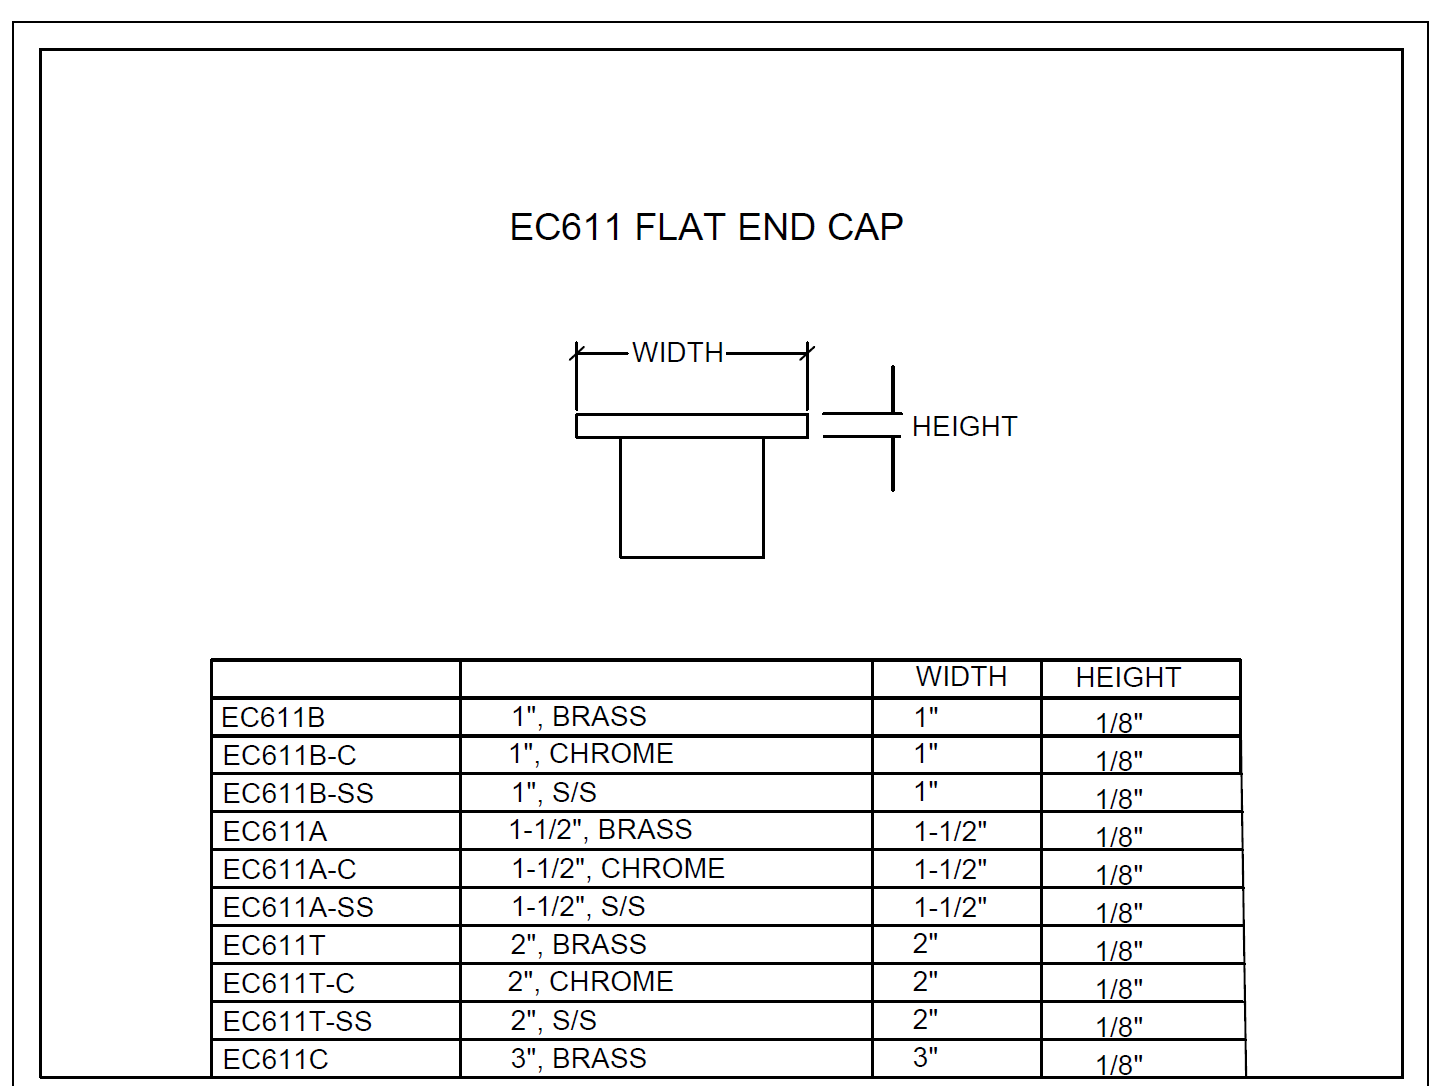 Flush Flat End Cap 2" - All finishes